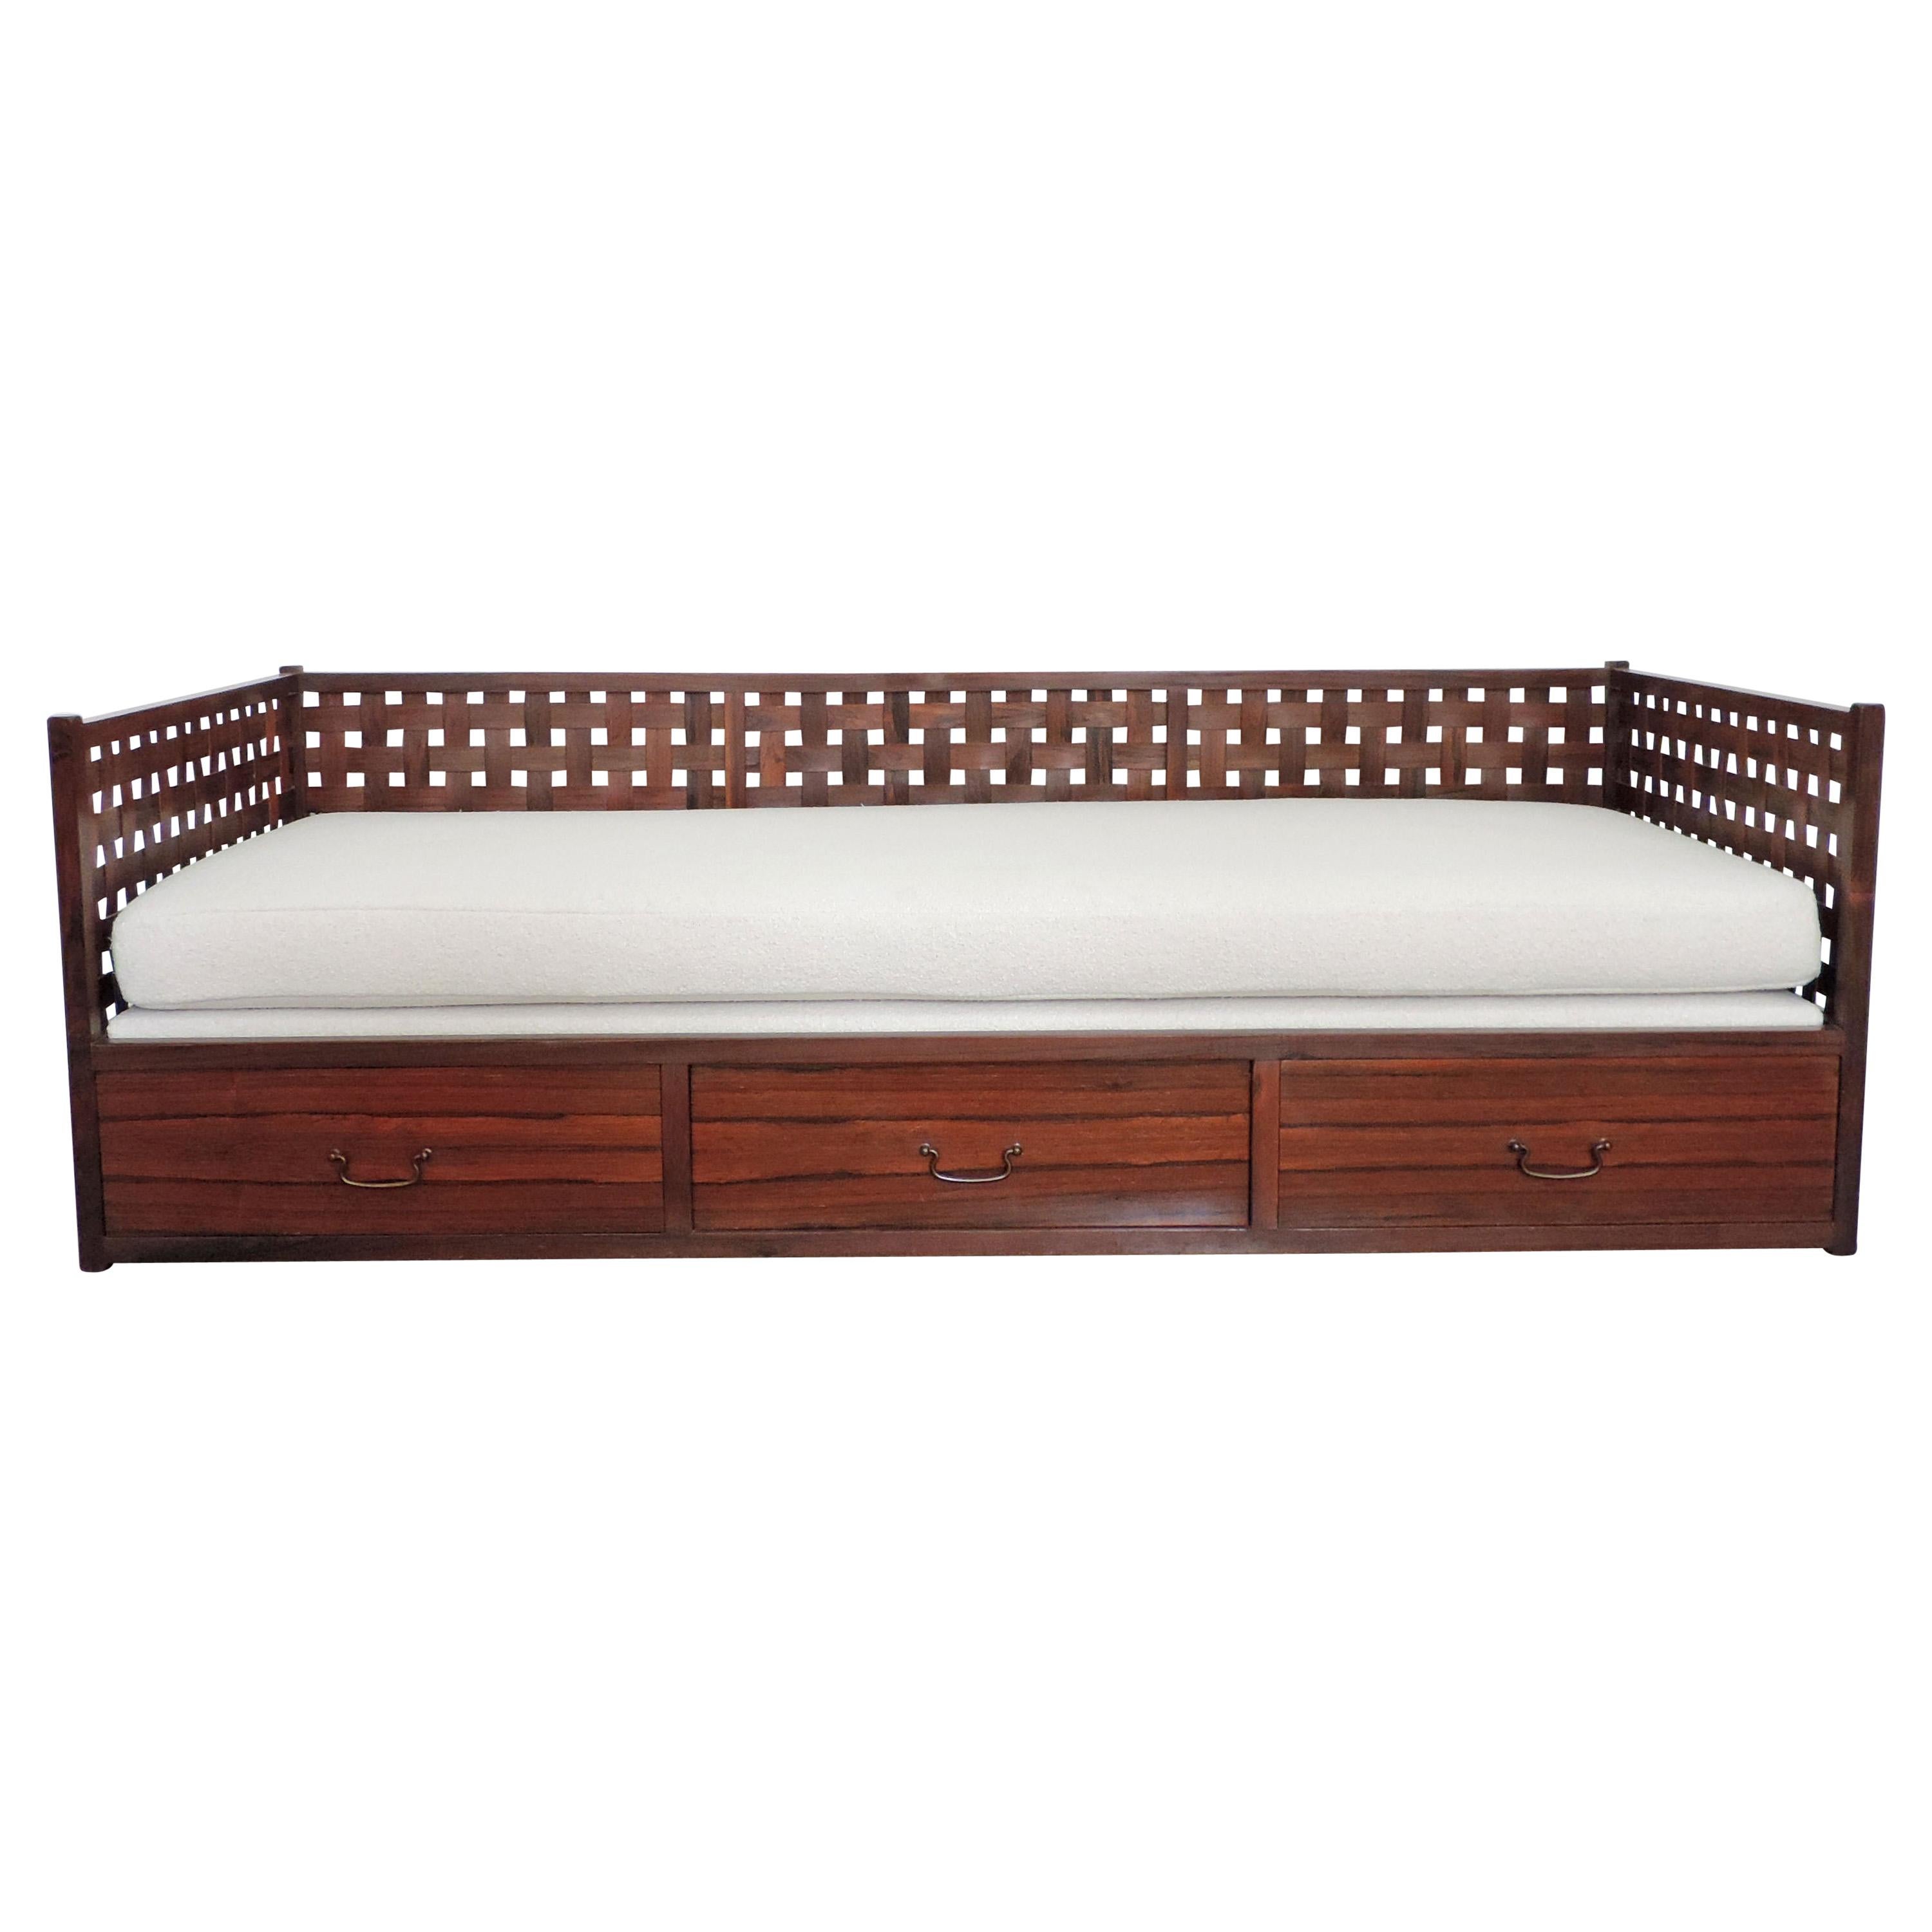 Tito Agnoli Daybed with Three drawers for Mobilia, Italy, 1960s